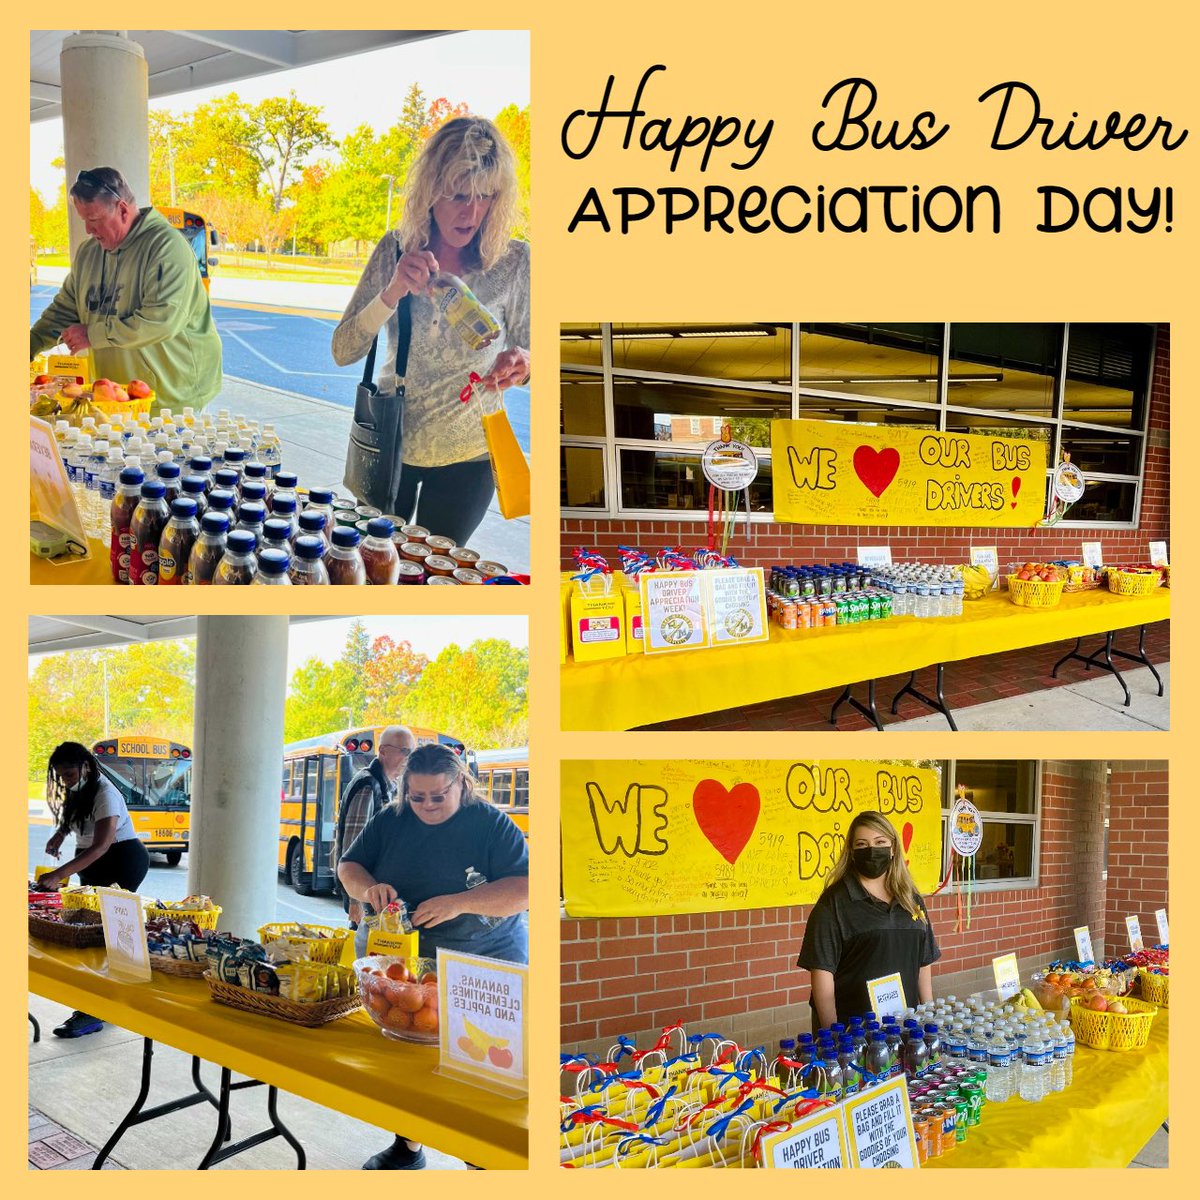 Thanks to the IB Office, Ms. Labastida, and our PTSA for celebrating our Bus drivers!!! They loved it! @RMHS_MainOffice @RMHSmagnet